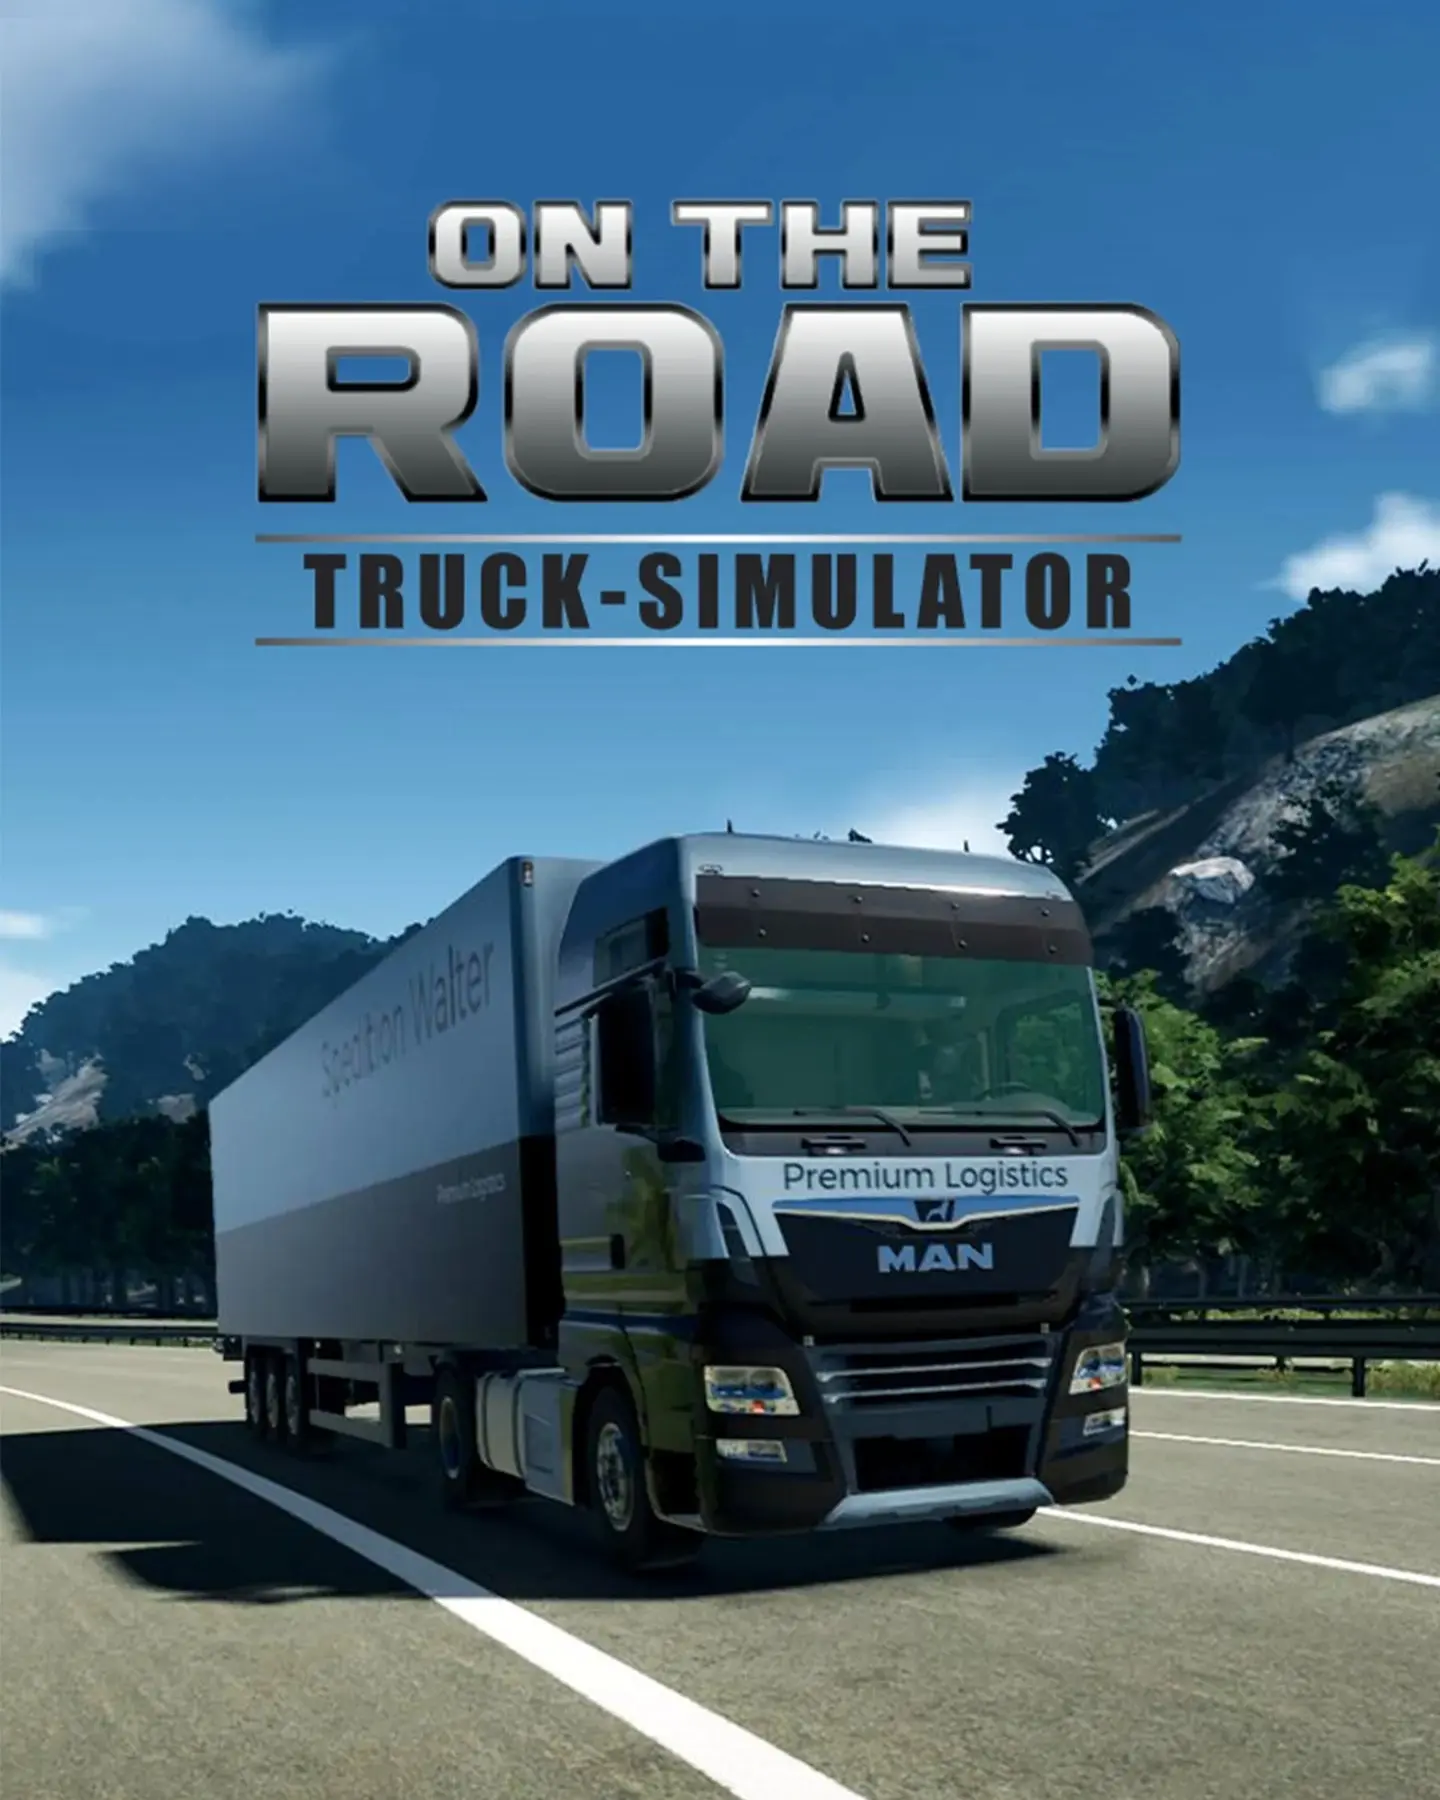 On The Road The Truck Simulator (AR) (Xbox One / Xbox Series X|S) - Xbox Live - Digital Code